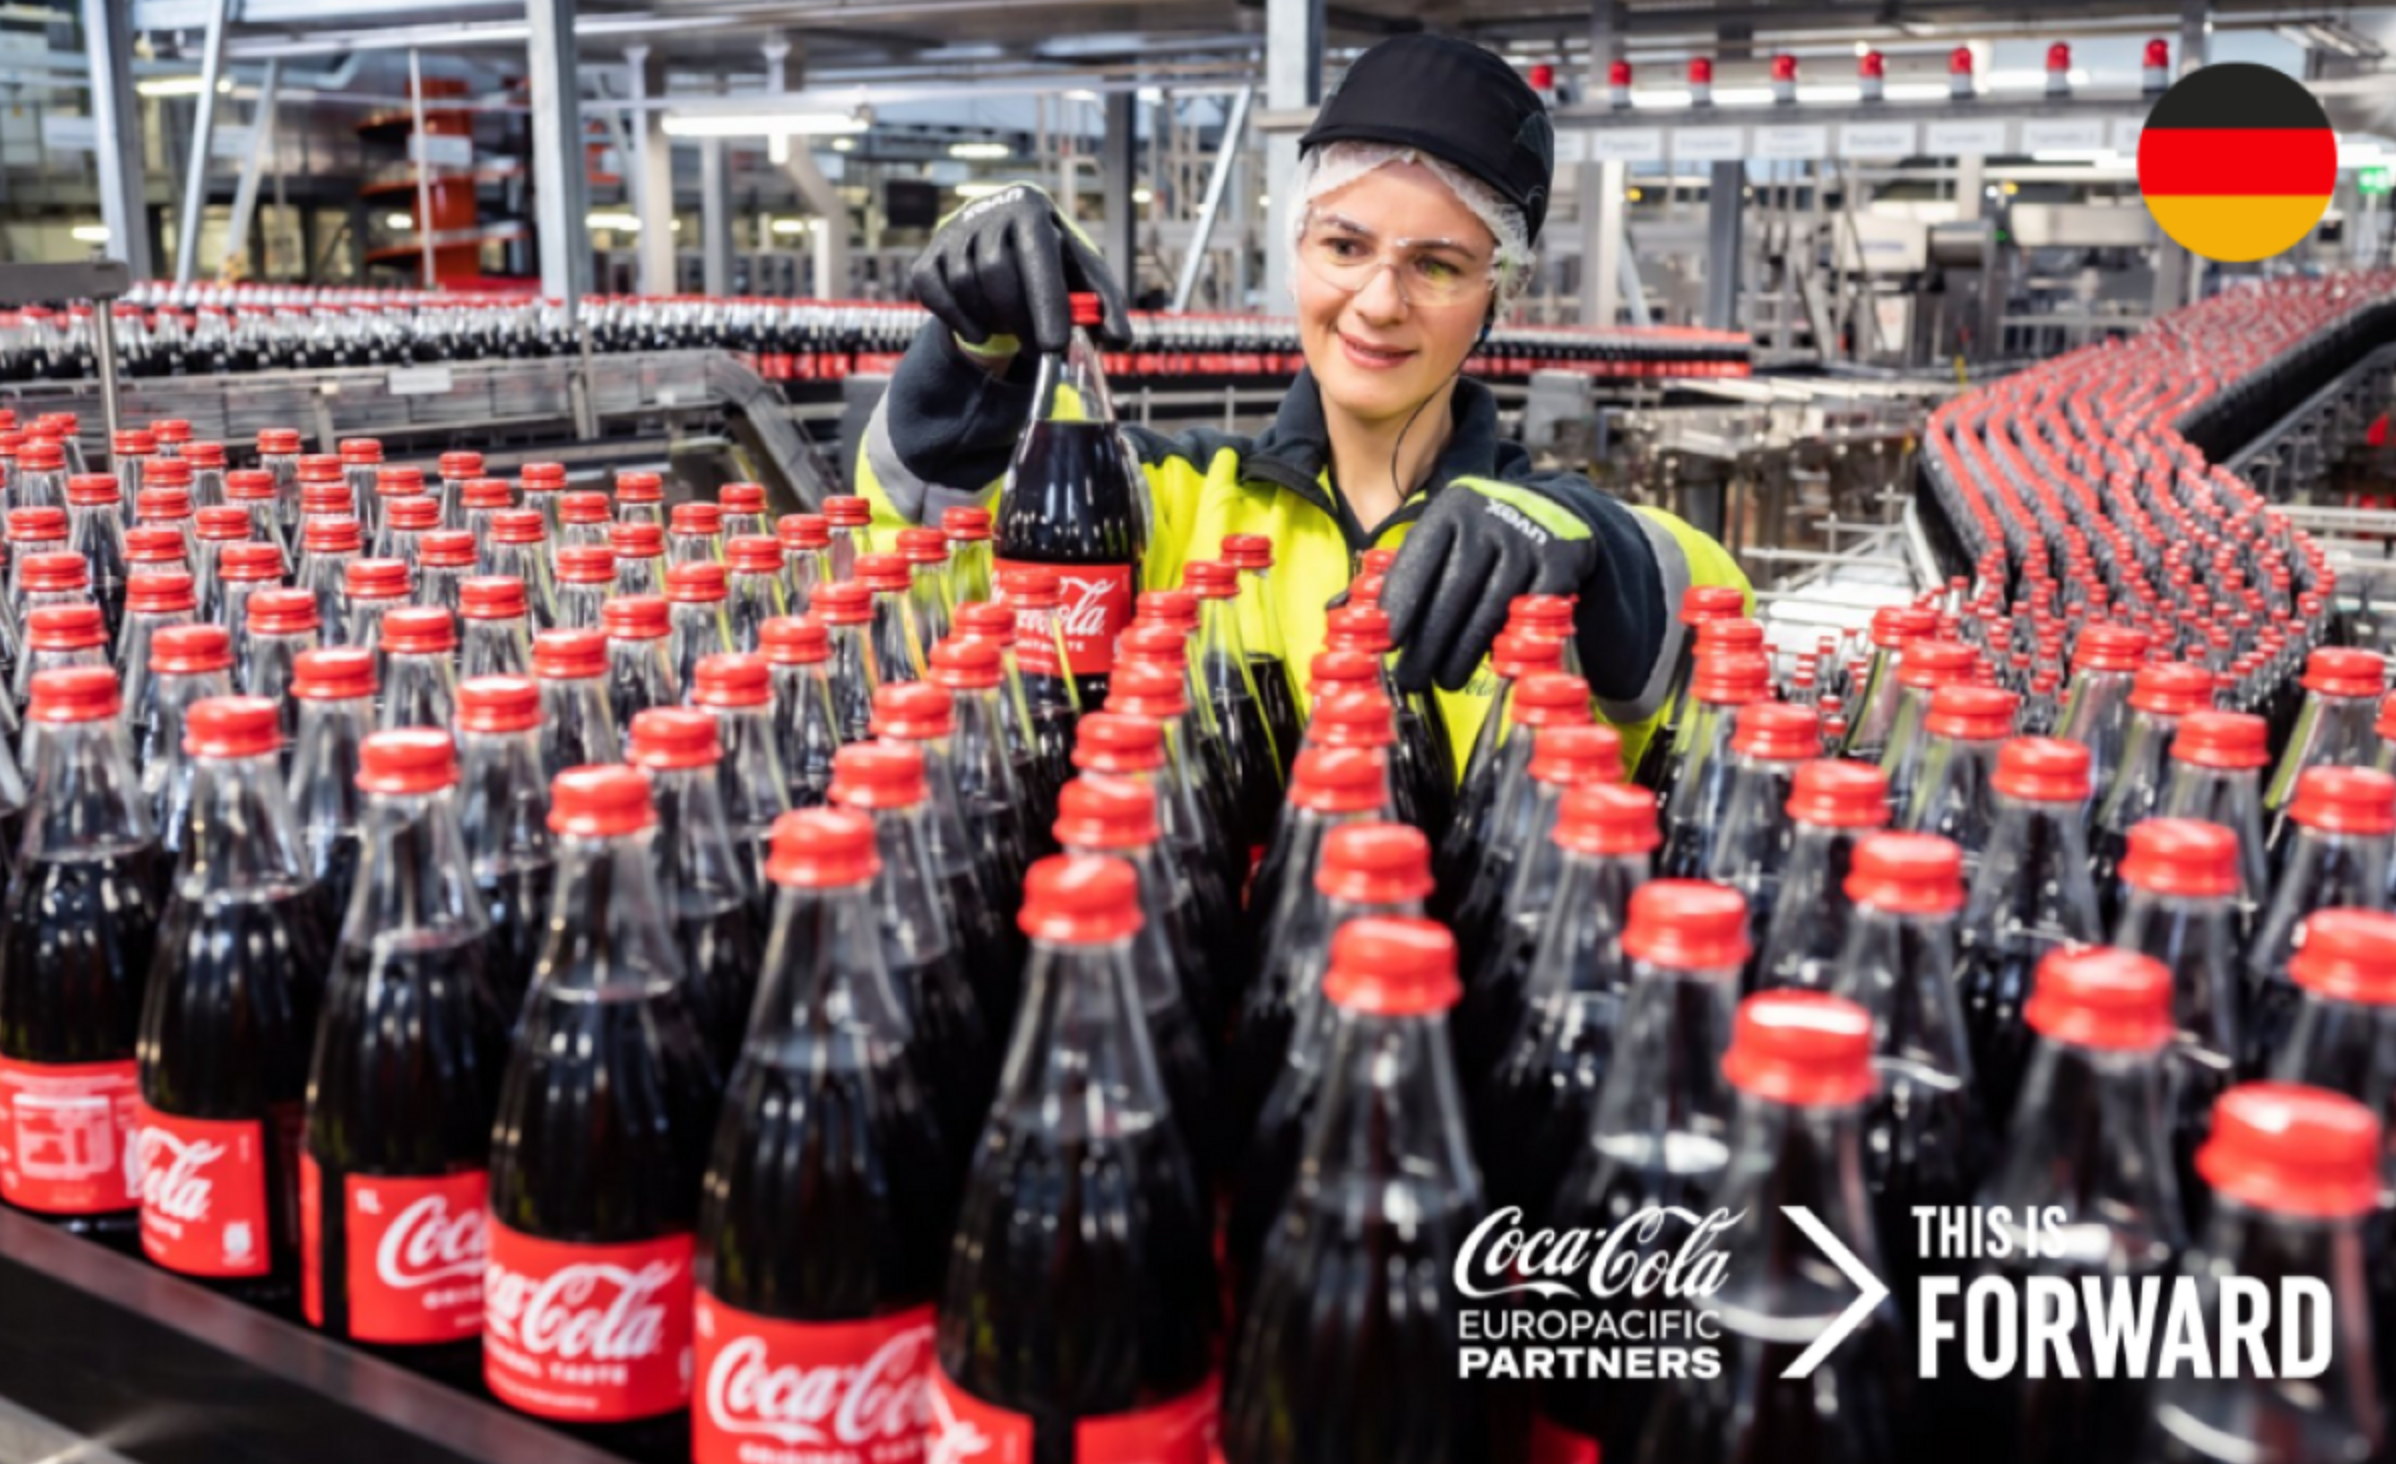 Coca-Cola invests 40 million euros in reusable packaging in Germany